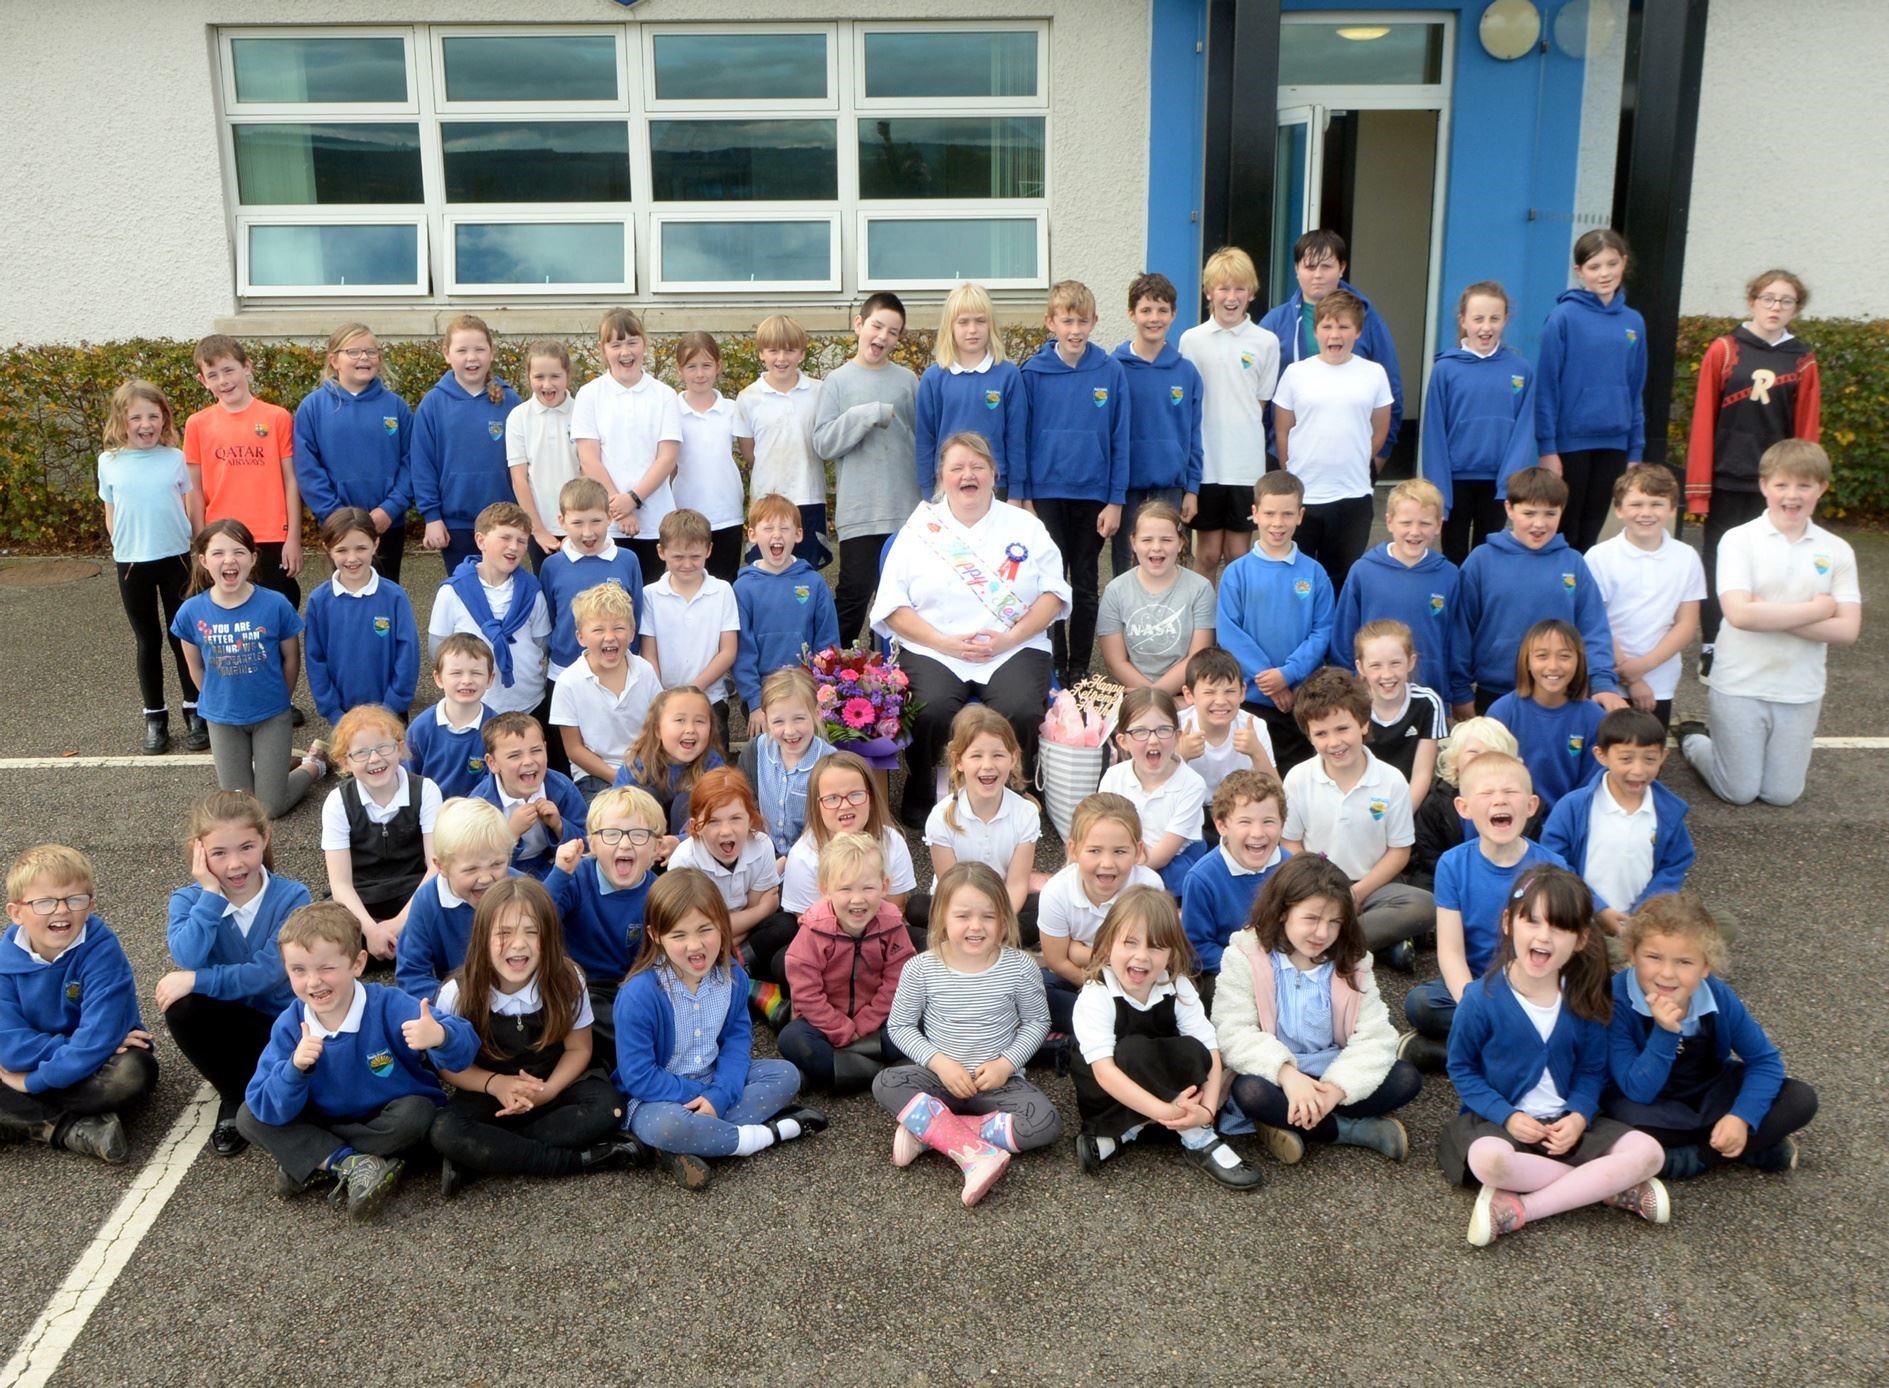 Heather Matheson with kids at Resolis Primary School who she served on her last day at work. Picture: James Mackenzie